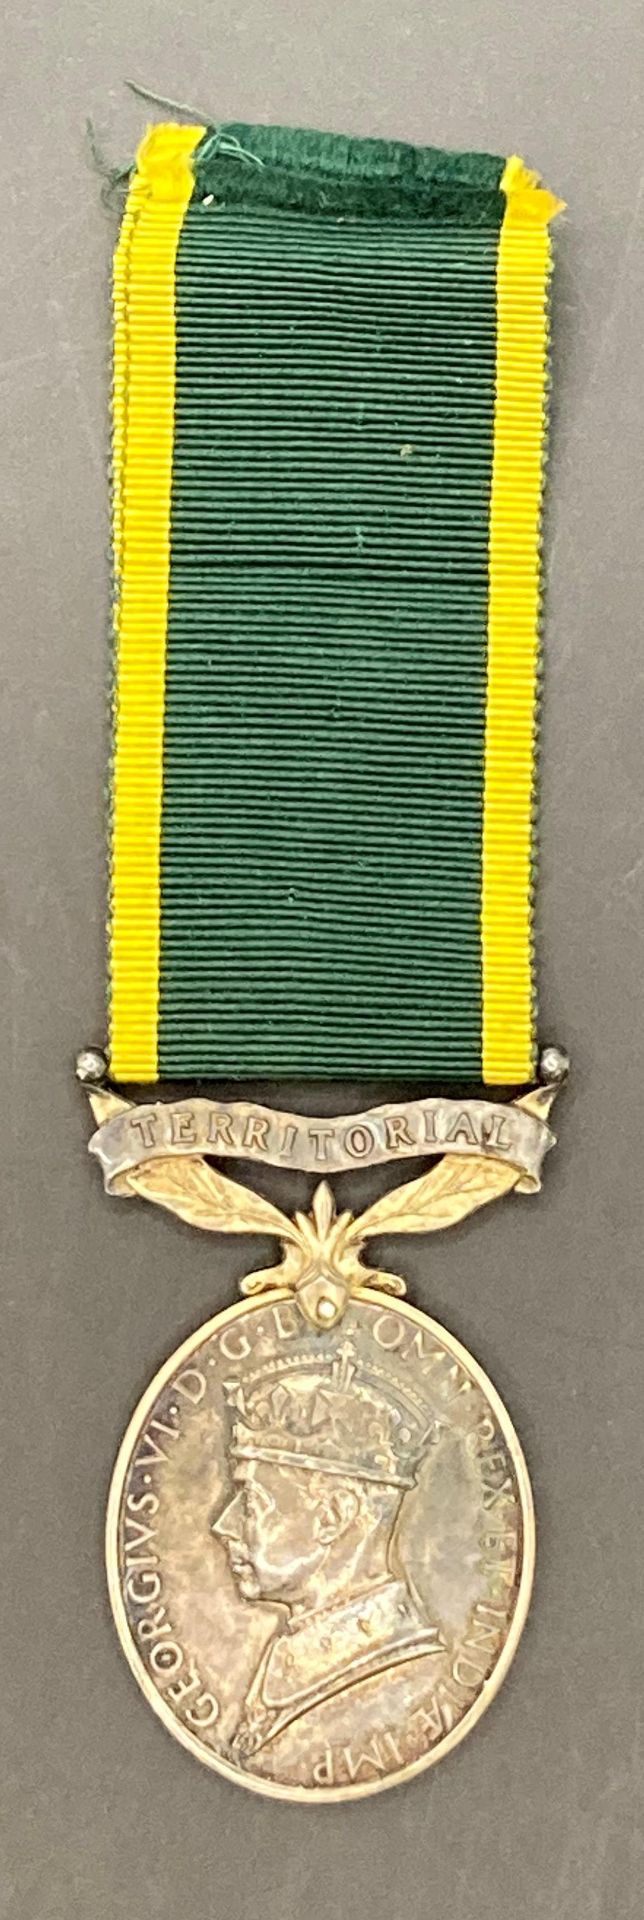 Efficiency Medal territorial complete with ribbon (George VI) to 7659847 Sjt A Hord RAPC (Saleroom